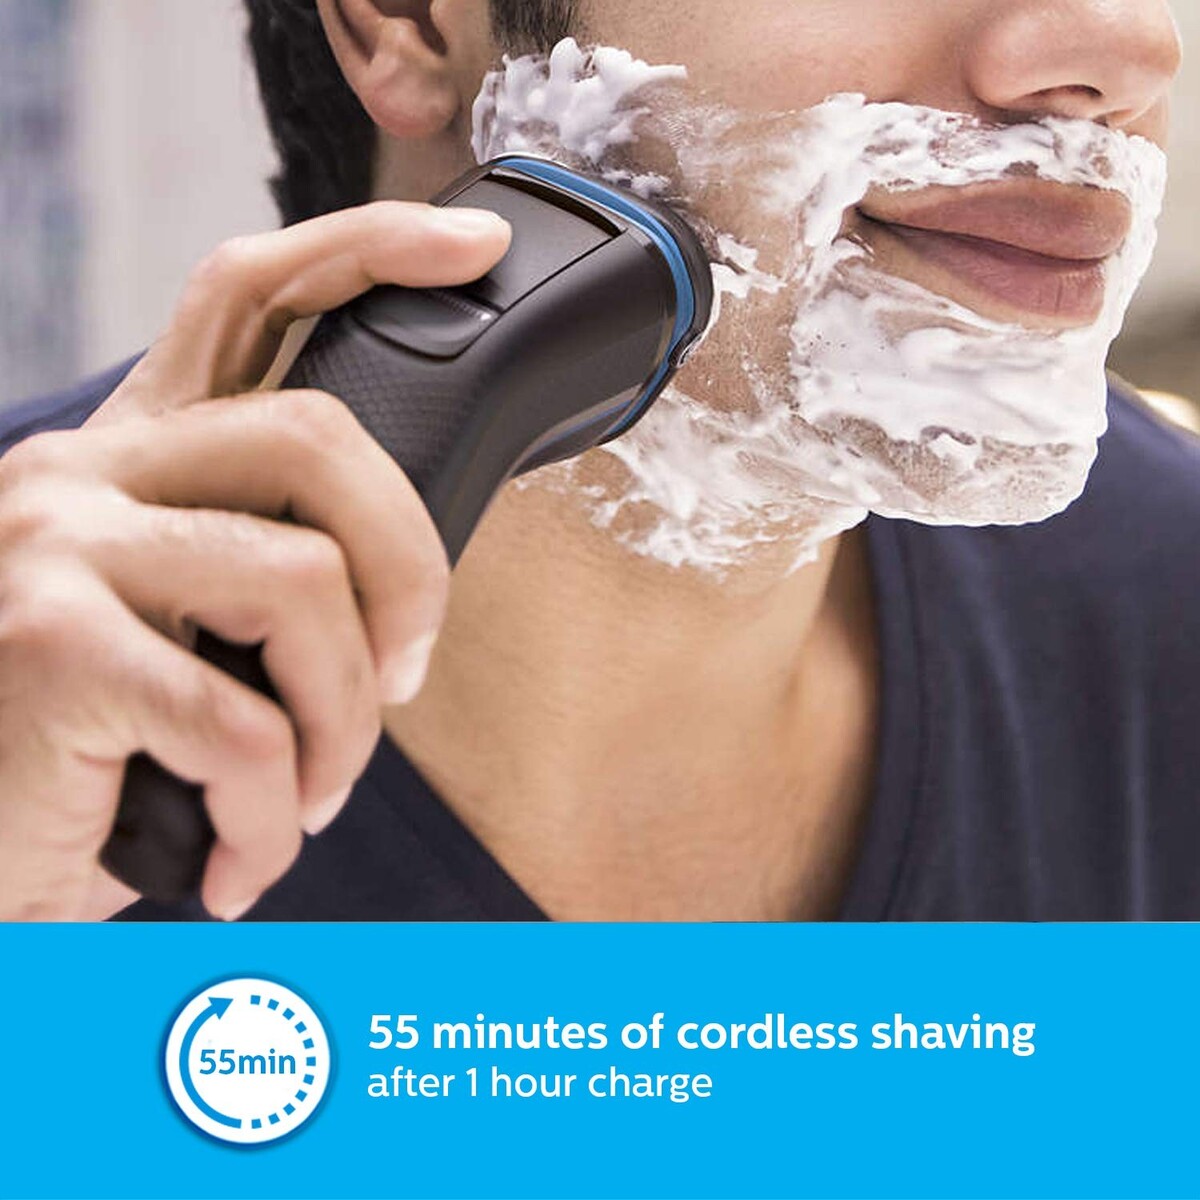 Philips Shaver S3122/55